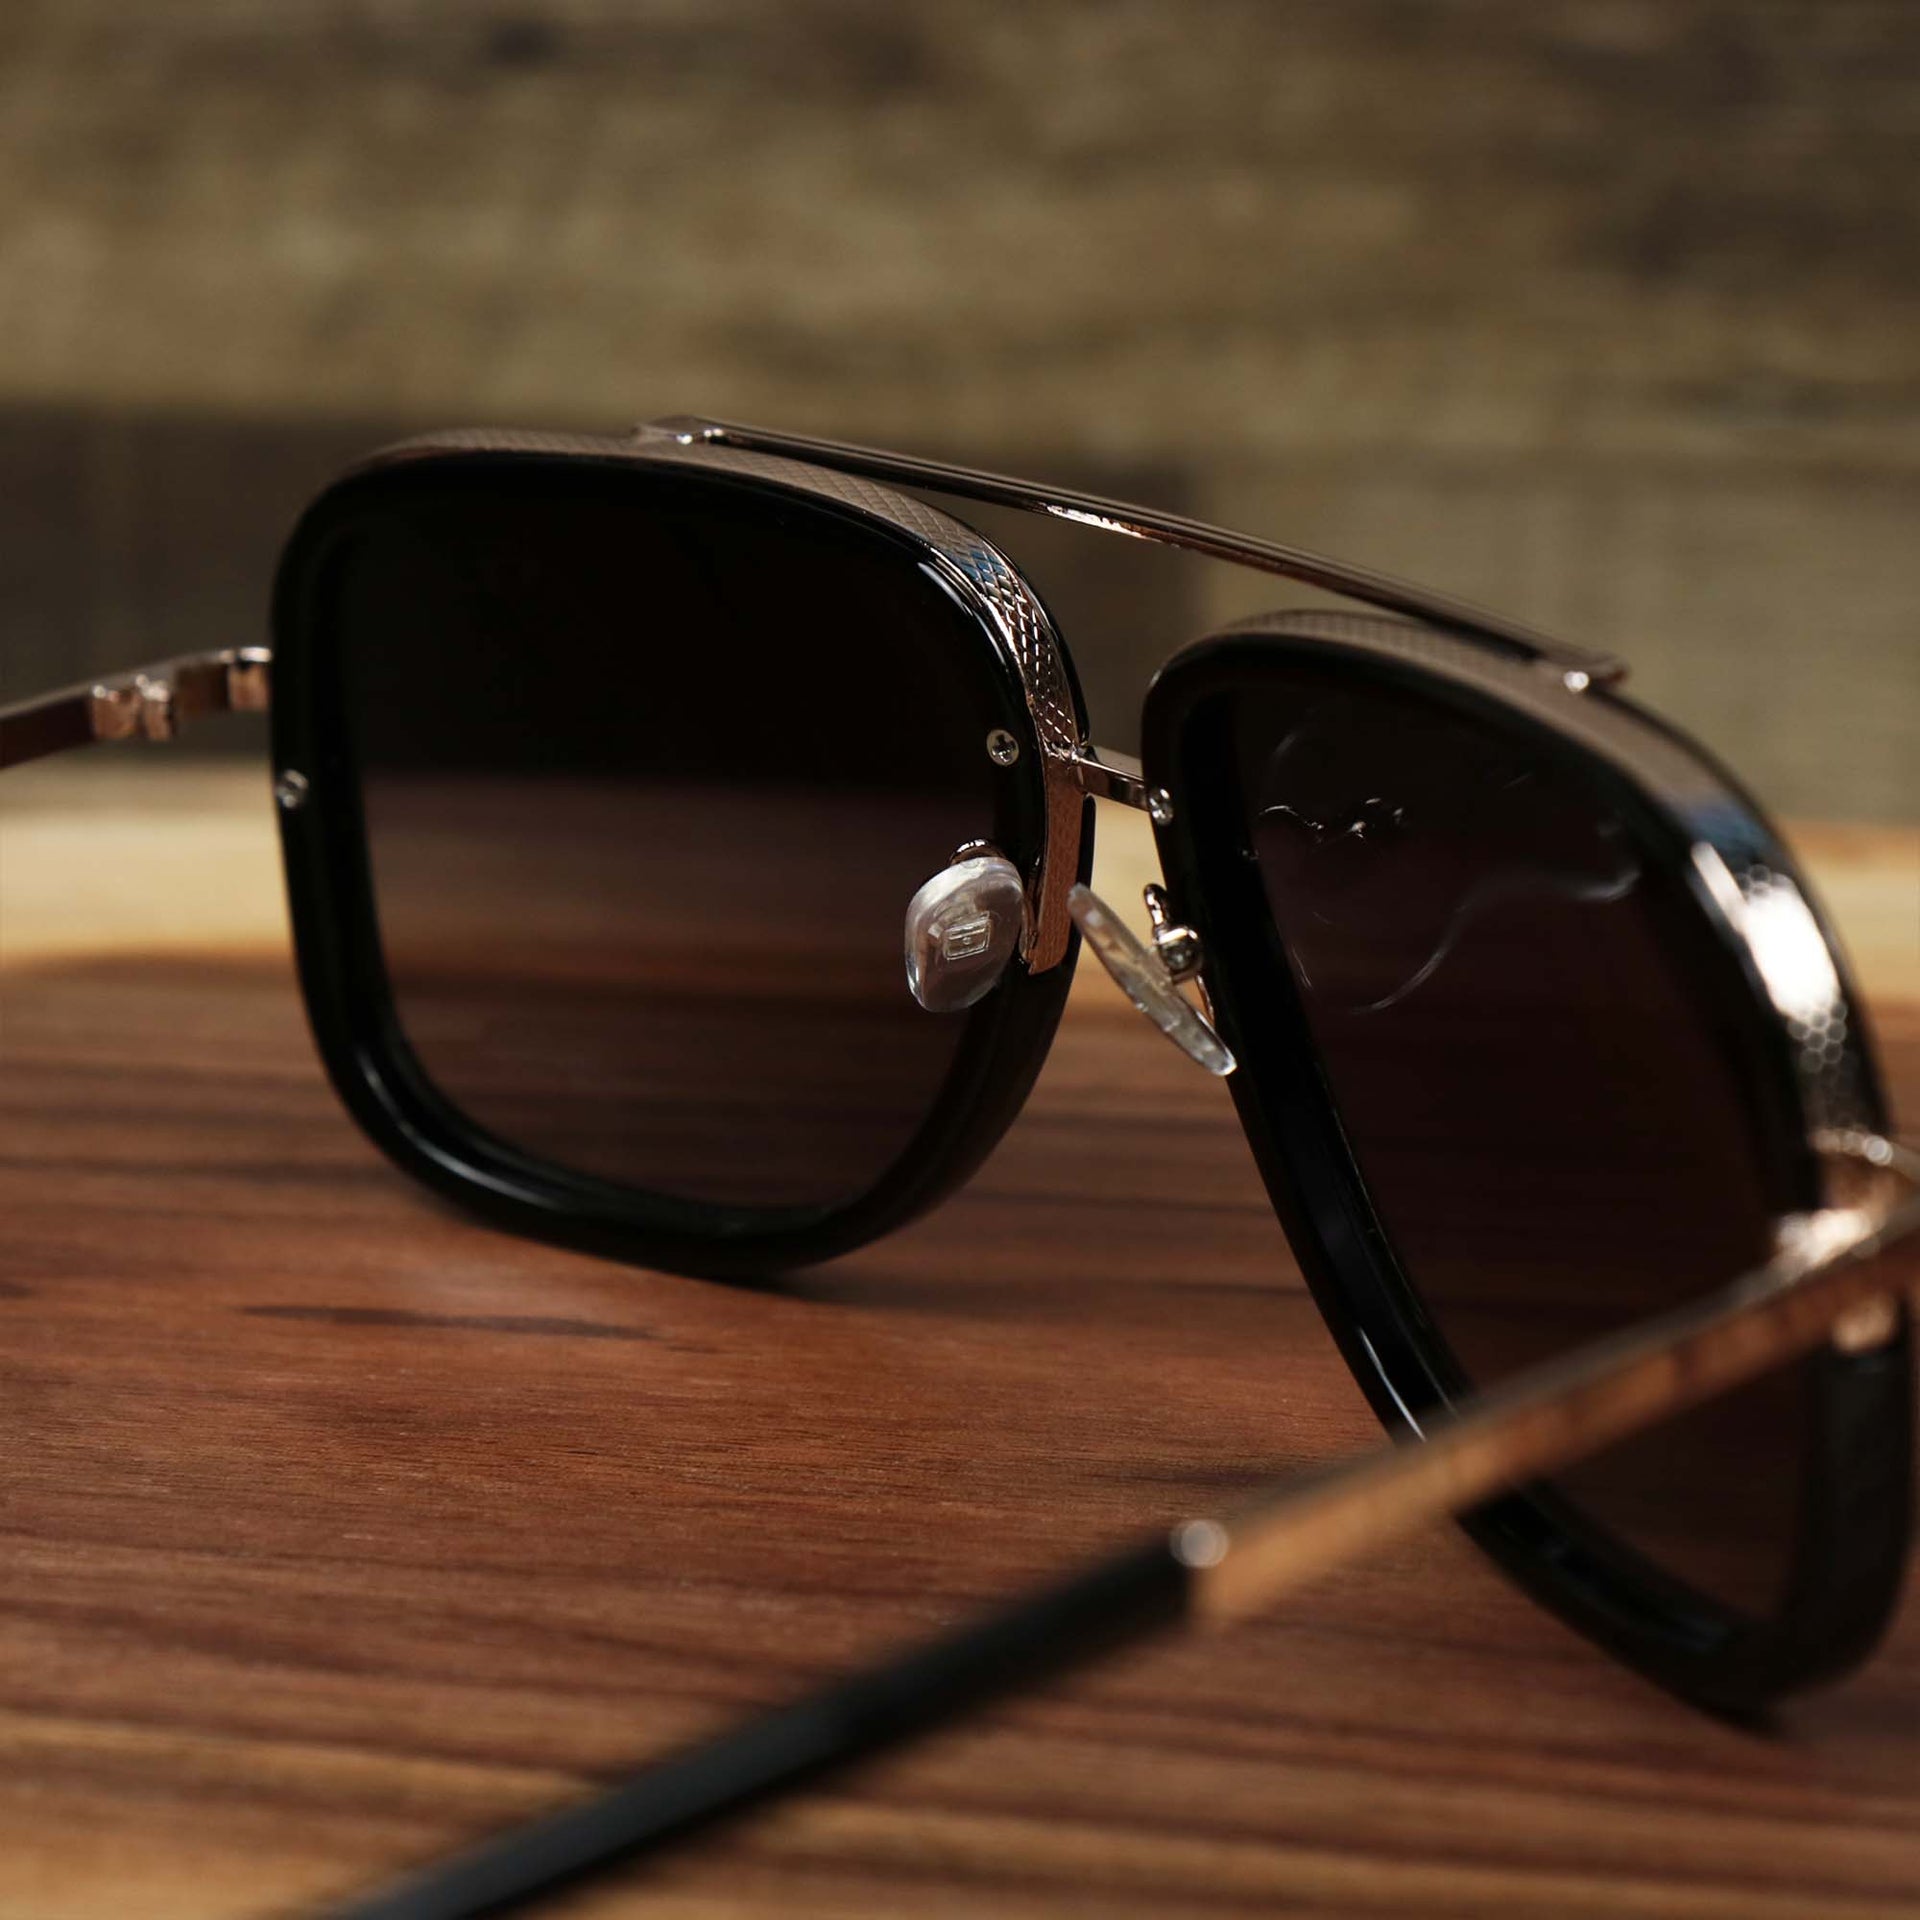 The inside of the Round Frames Black Lens Sunglasses with Black Gold Frame